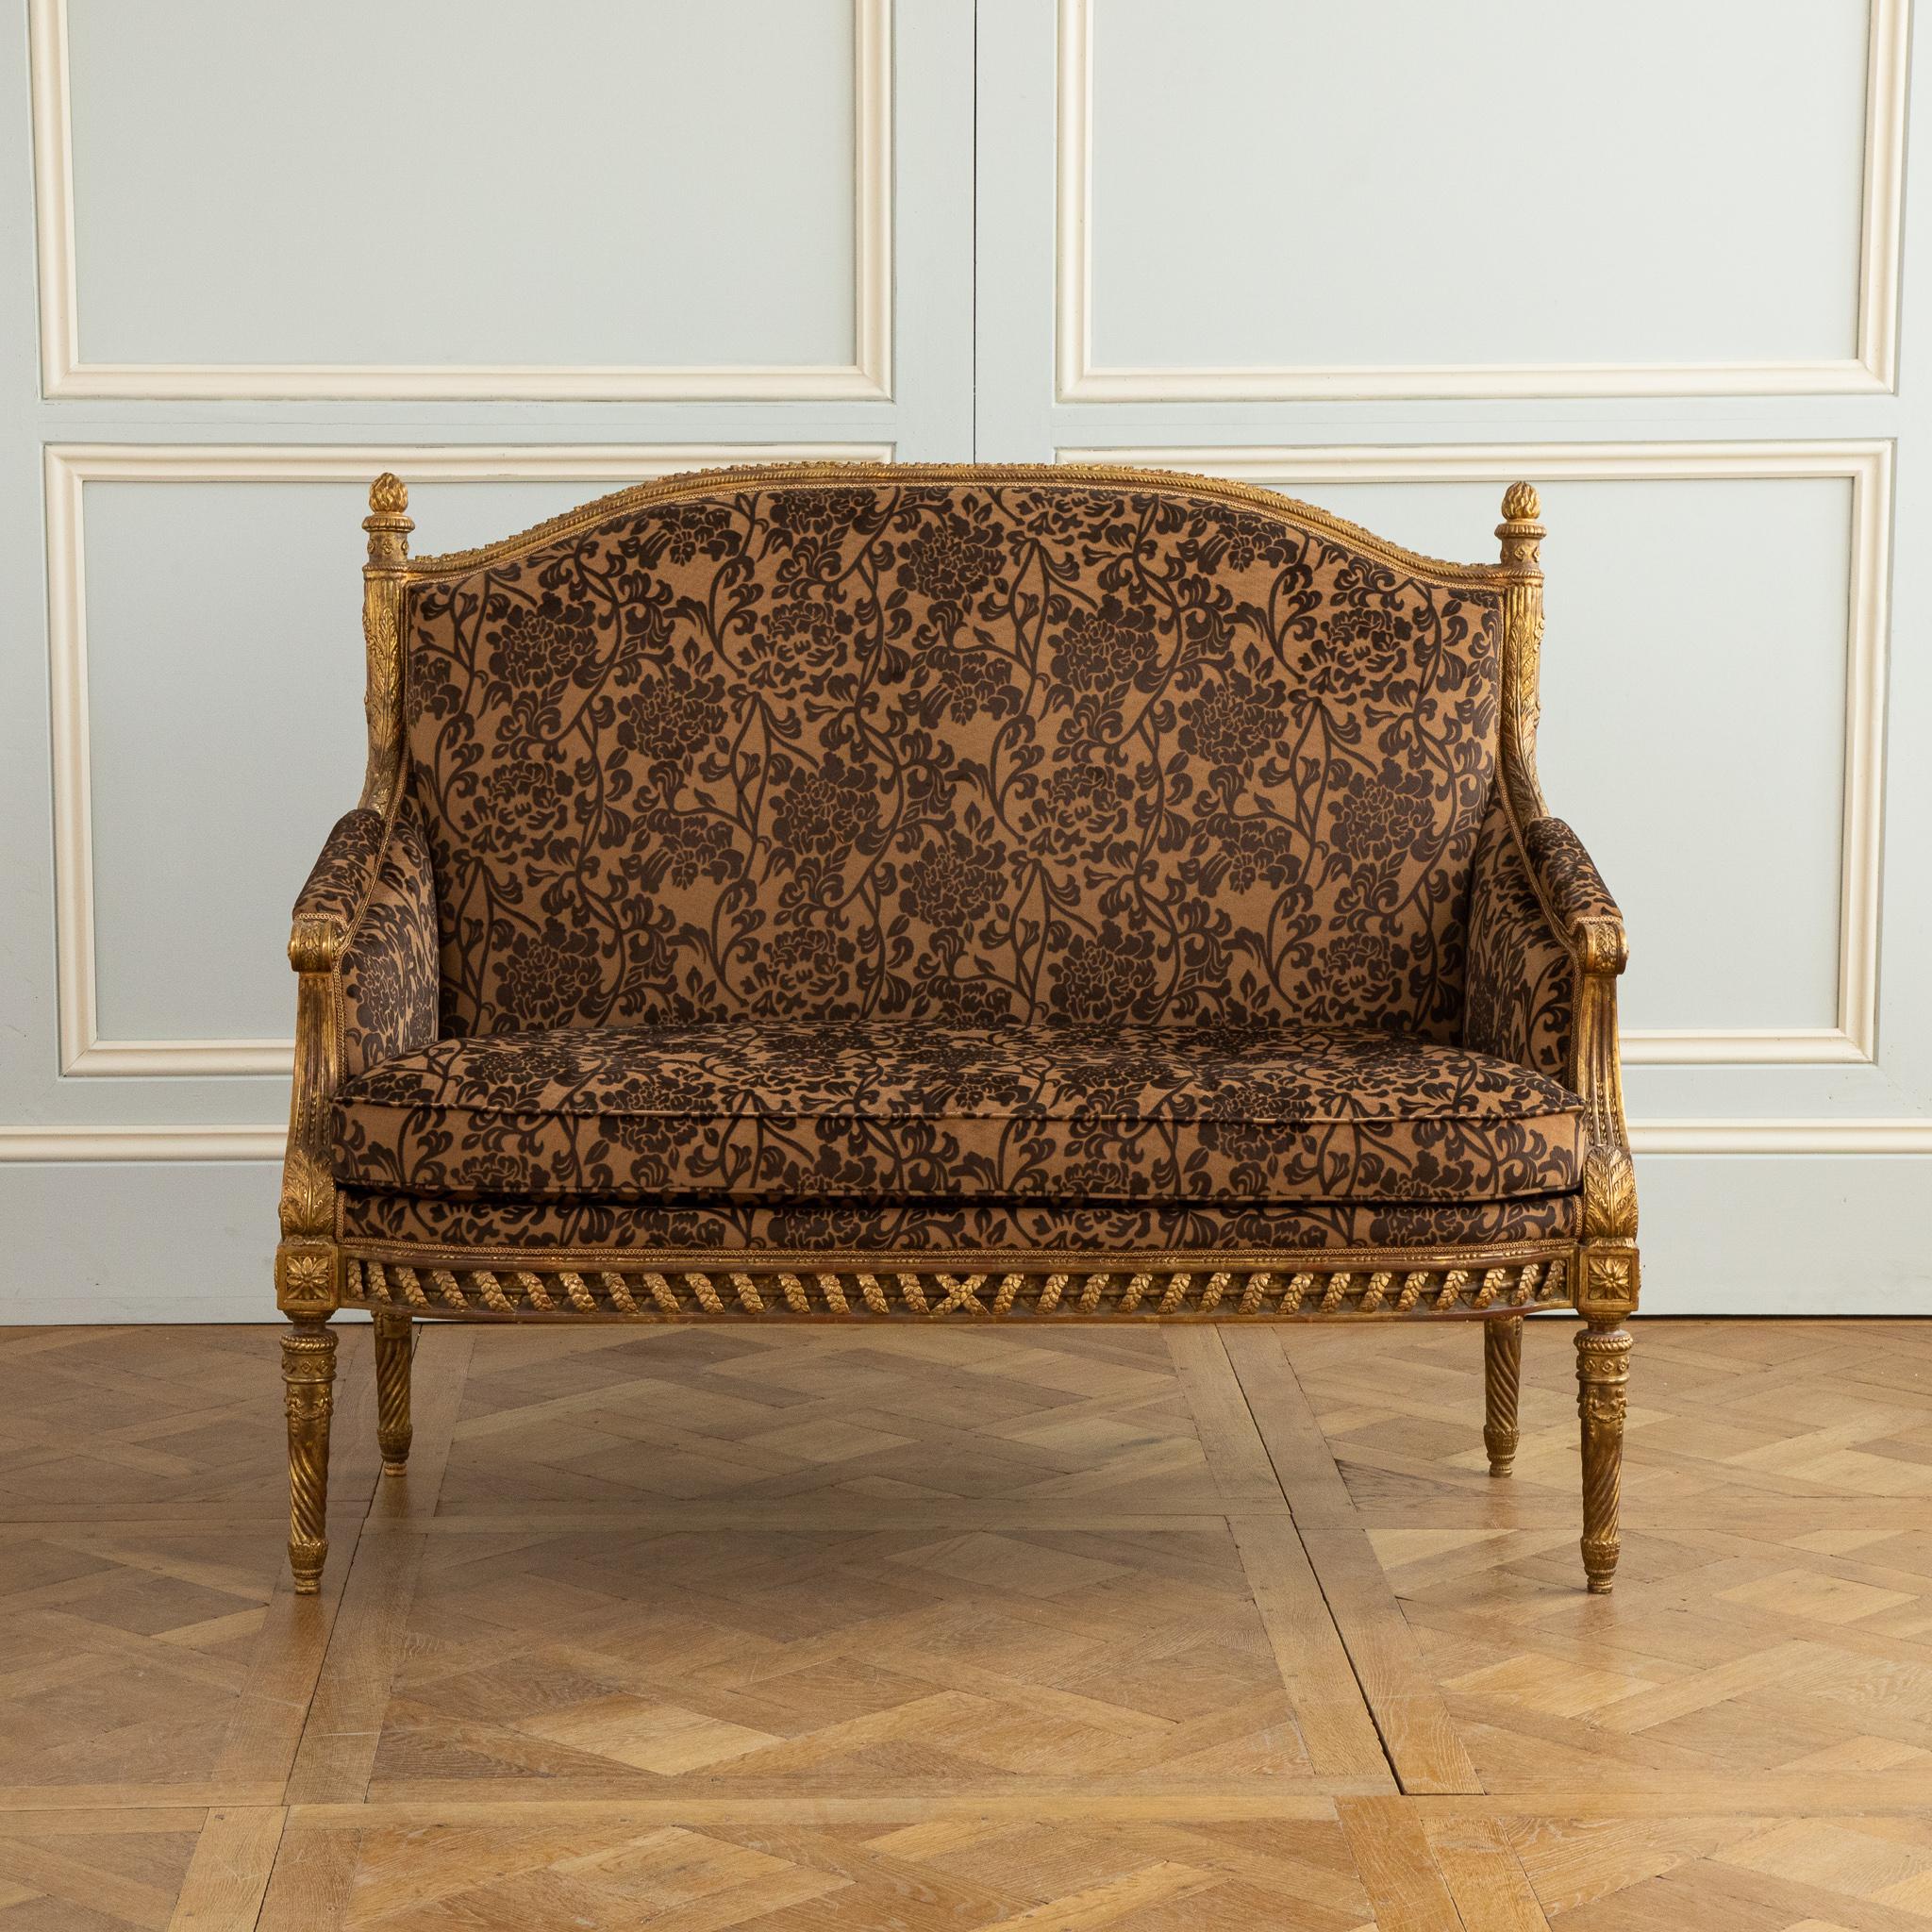 A Louis XVI style two seater sofa featuring exquisitely fine carving from LML's most master carvers. The piece is a replication of an original; made to the highest standard and finished in a hand gilded patina which has been given an old gold,